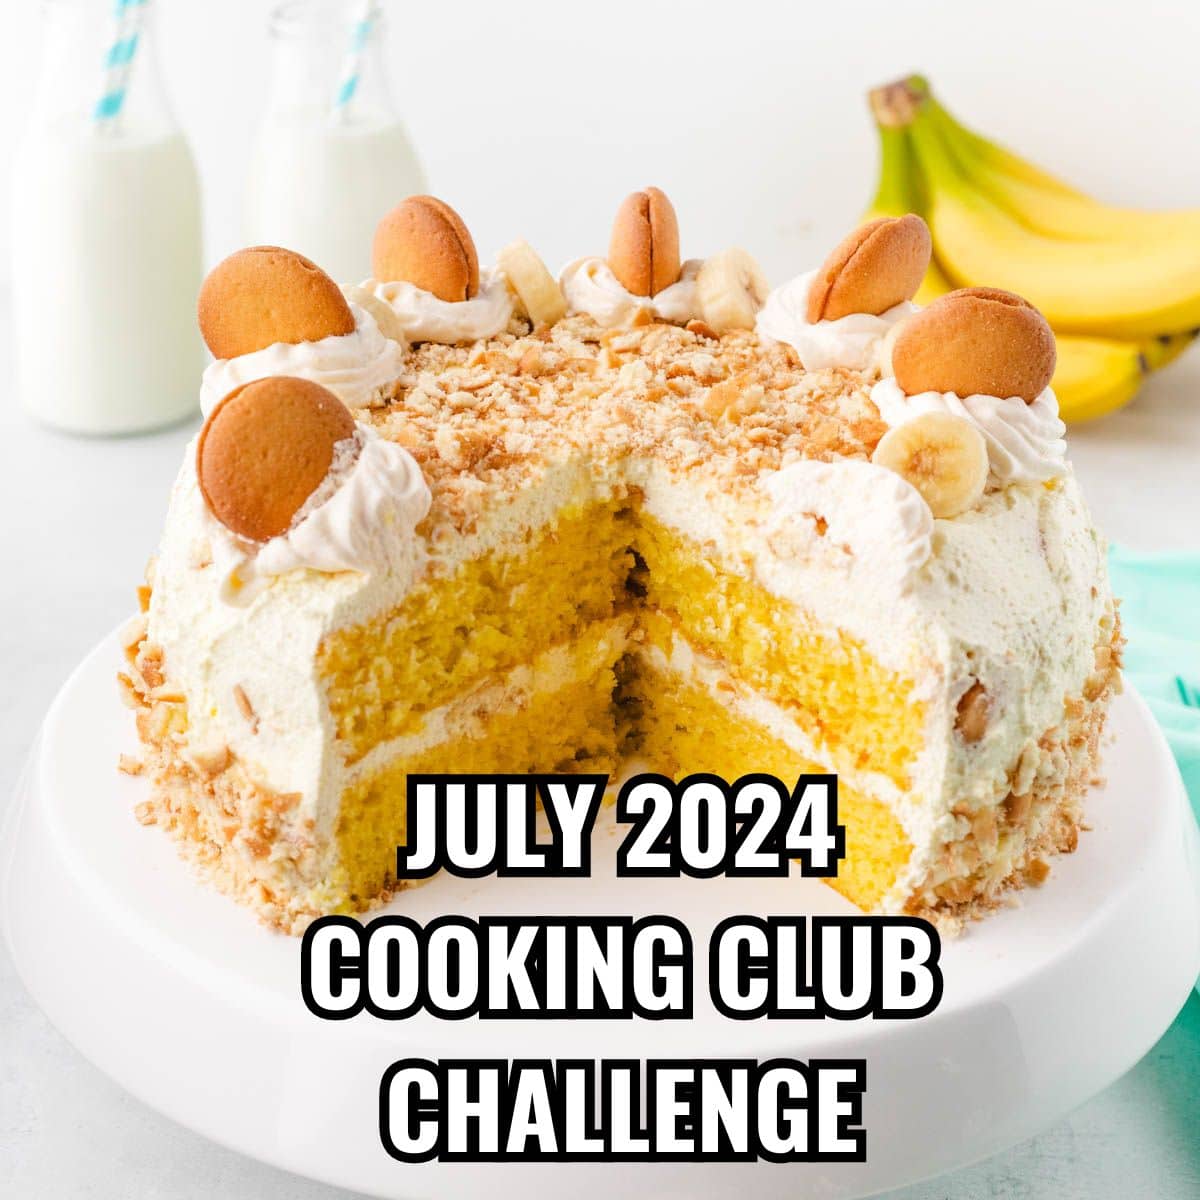 Cooking Club Challenge July 2024